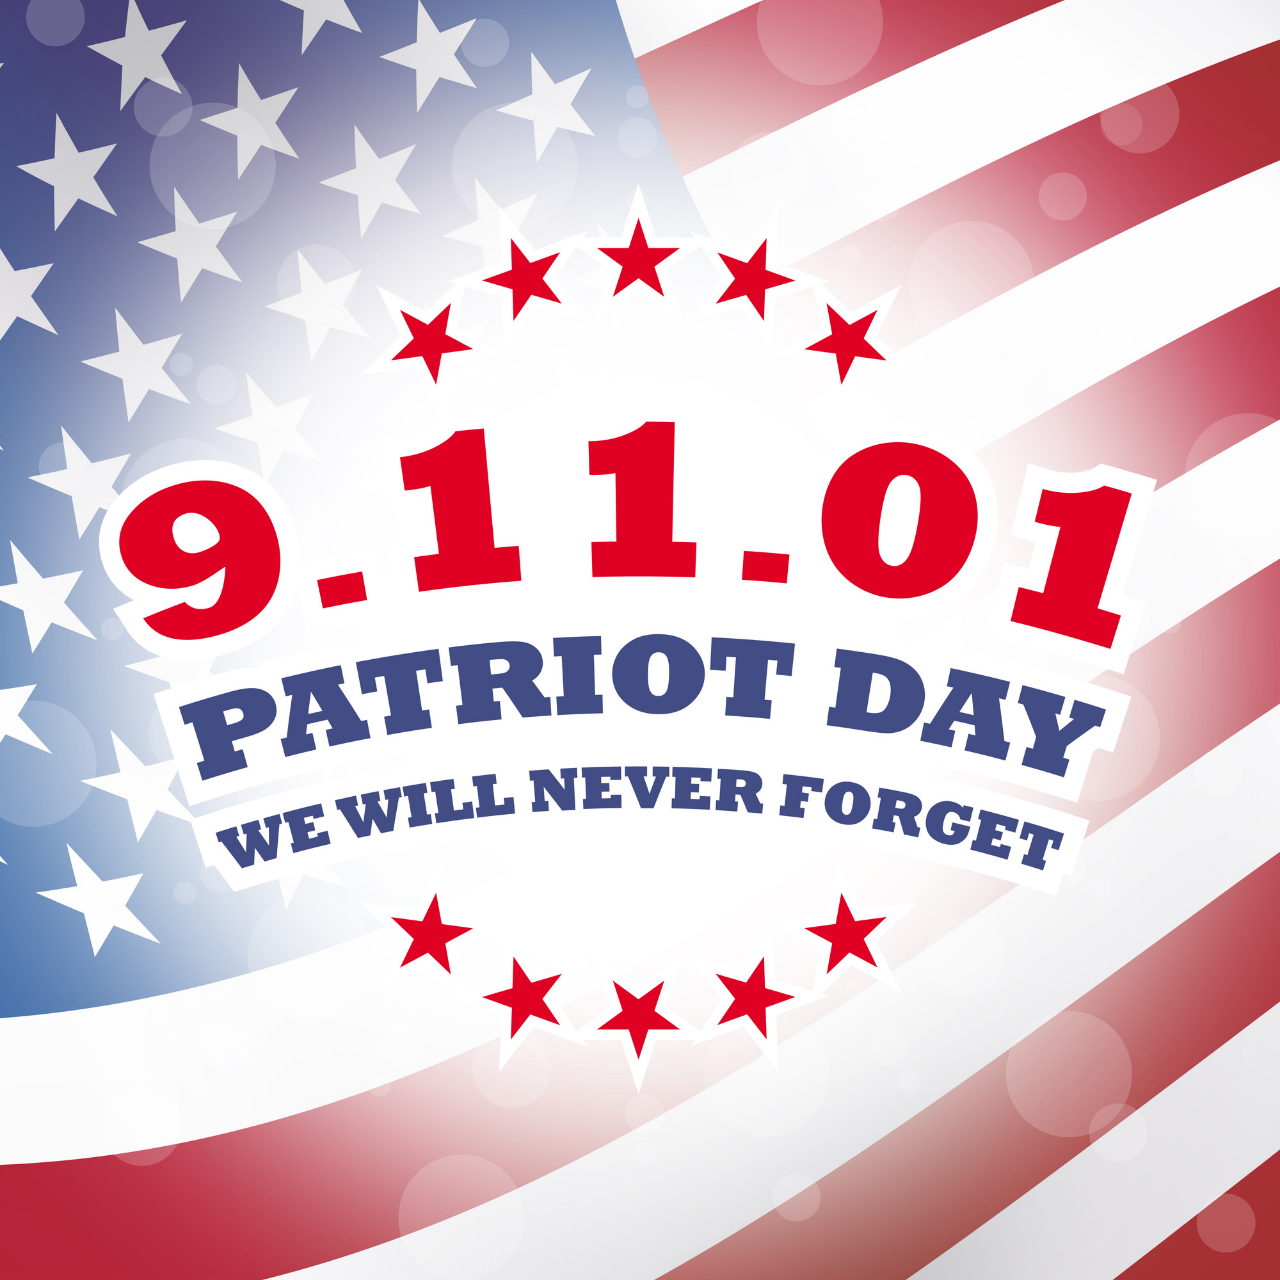 9/11 Anniversary: Patriot Day 2021 Quotes, Messages, Sayings, Stickers, and Meme to share